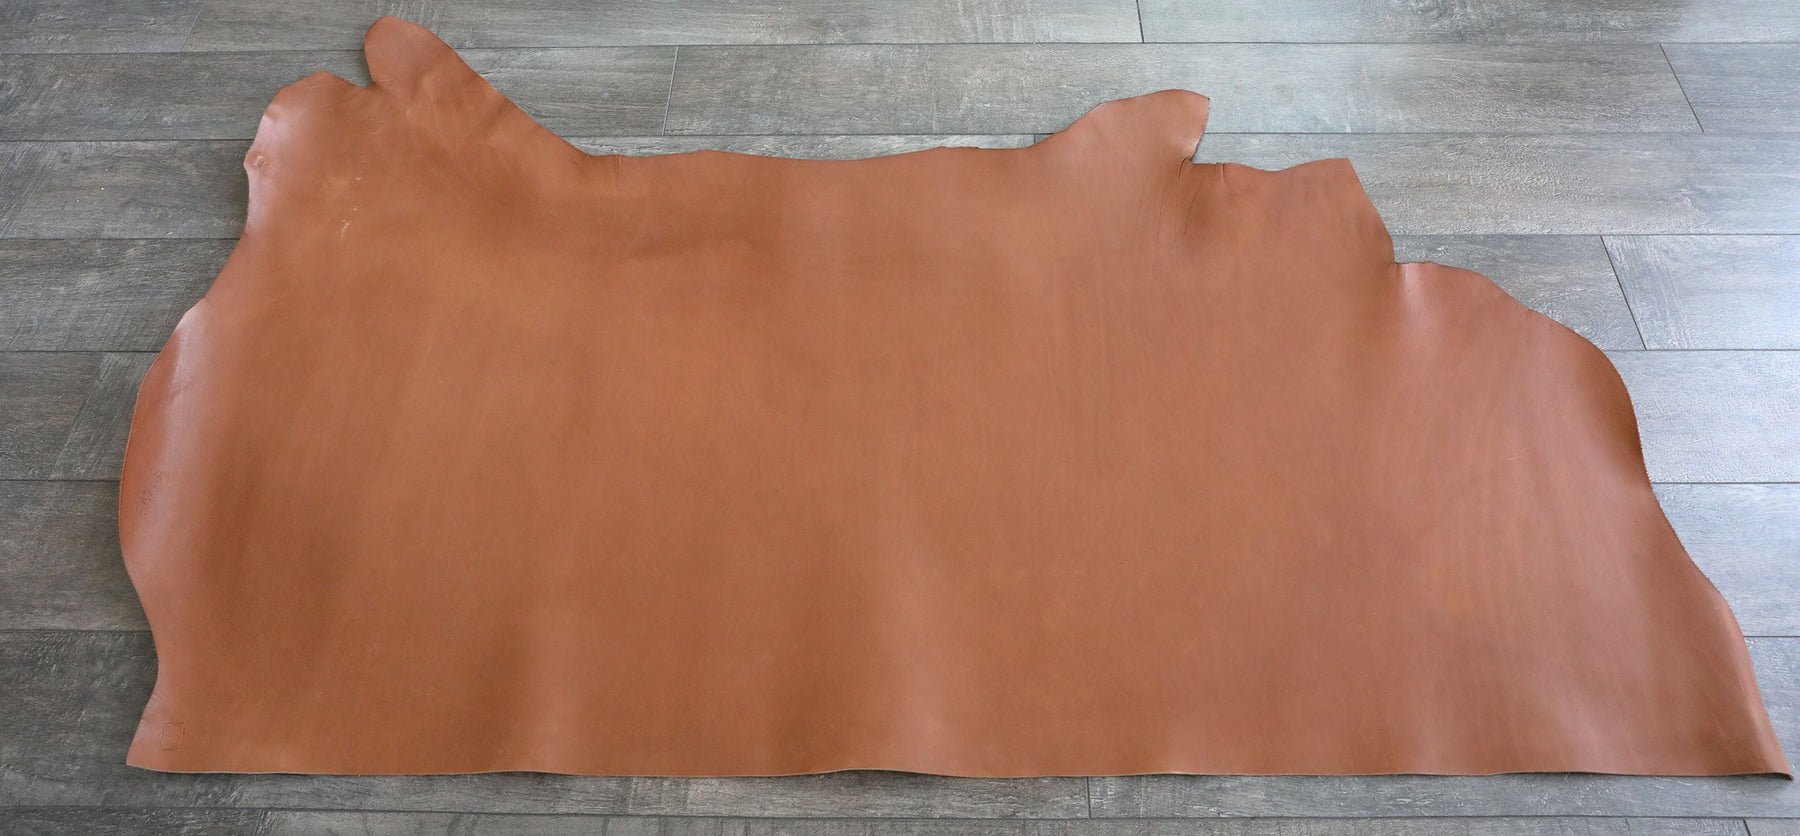 Tanneries Haas 🇫🇷 - Novonappa® - Luxury French Calf Leather (HIDES)